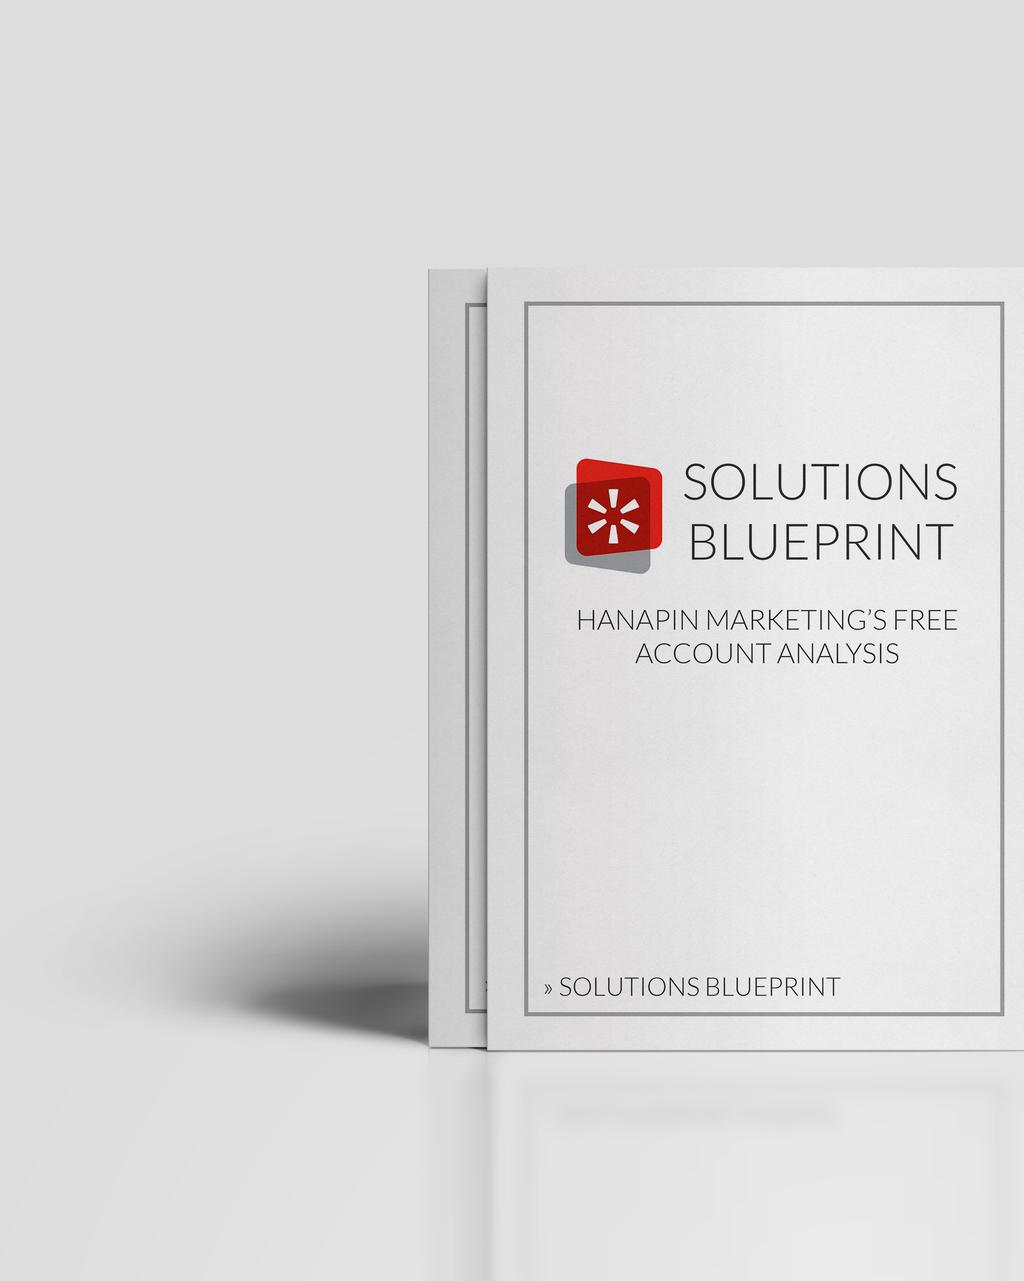 Need Better PPc REsults? Get a Free Account Analysis From Hanapin Marketing. www.hanapinmarketing.com 812.330.